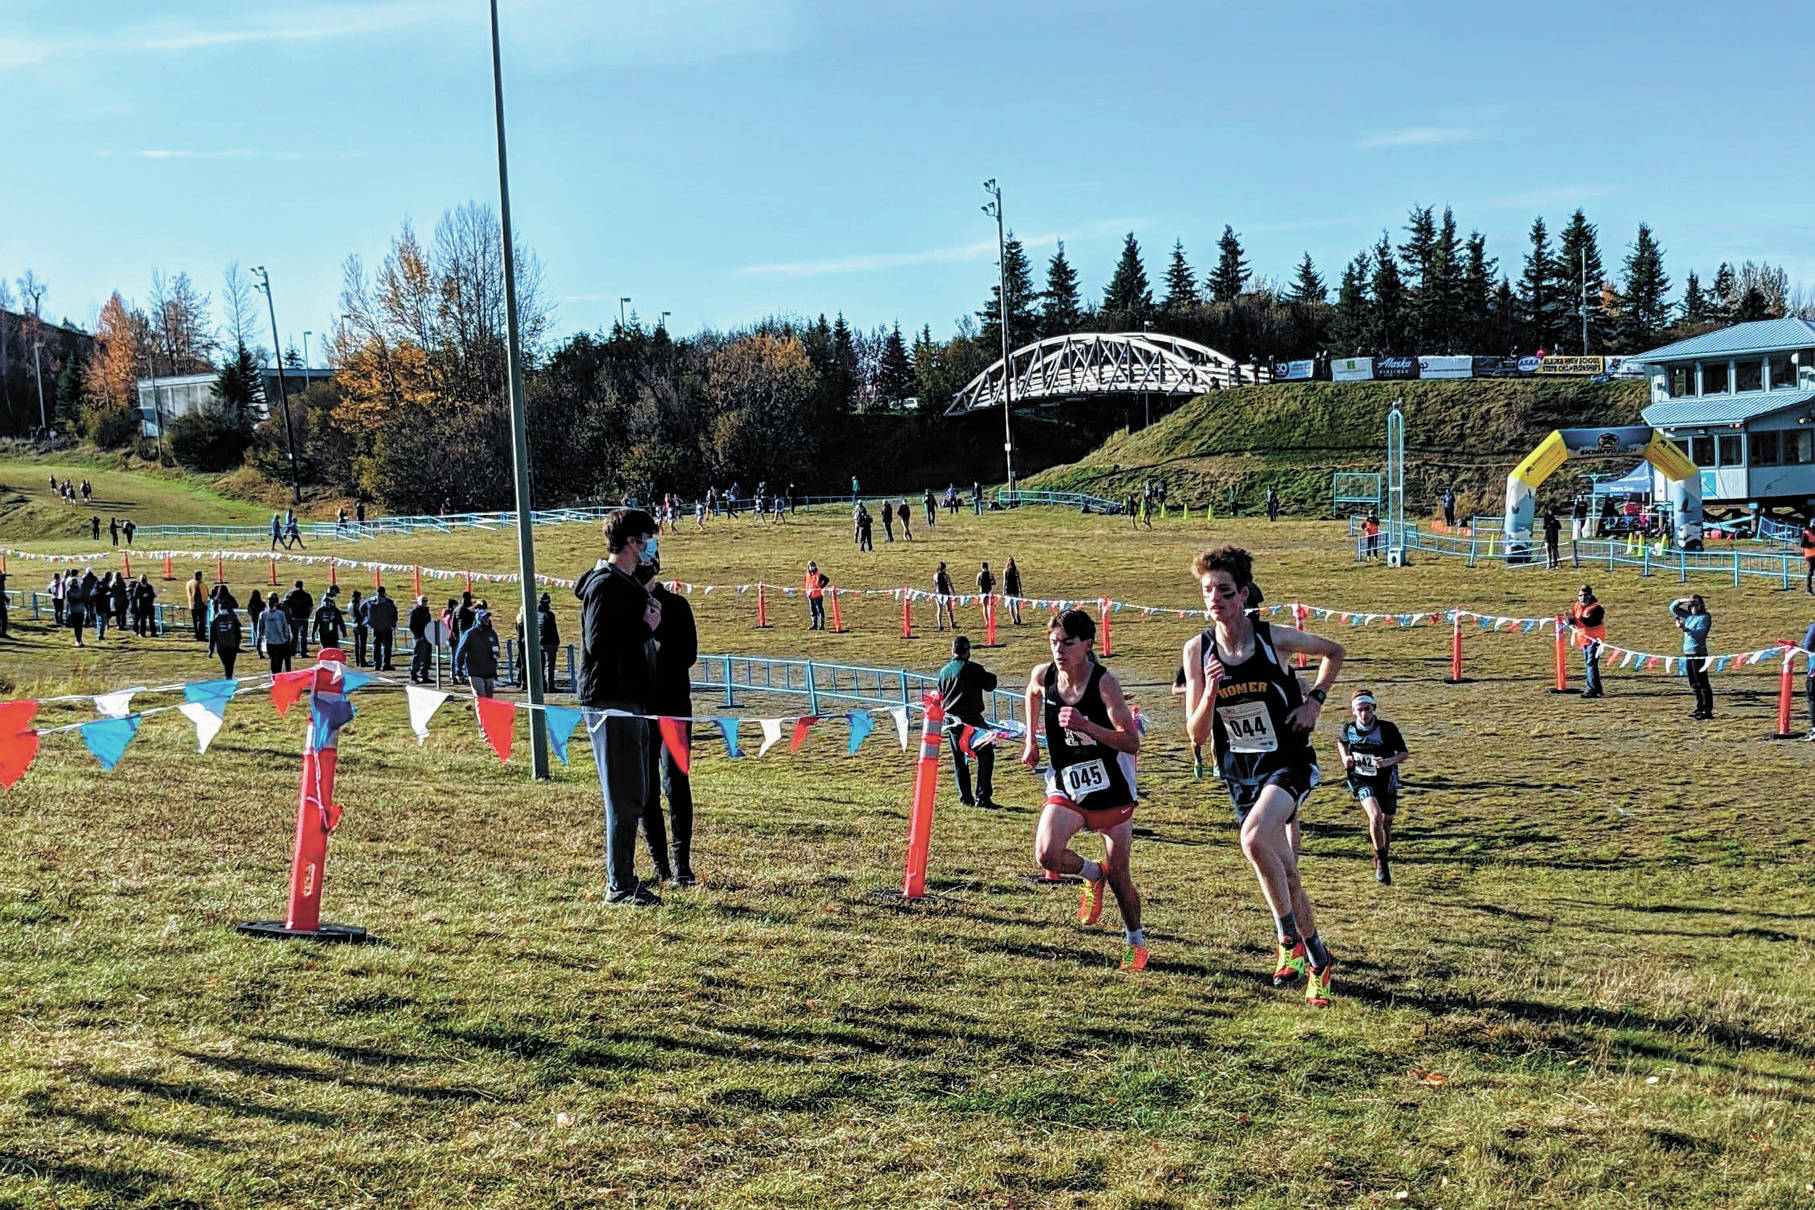 Seamus McDonough competes in the boys' Division II state cross country meet Saturday, Oct. 10, 2020 in Anchorage, Alaska. (Photo by Catriona Reynolds)